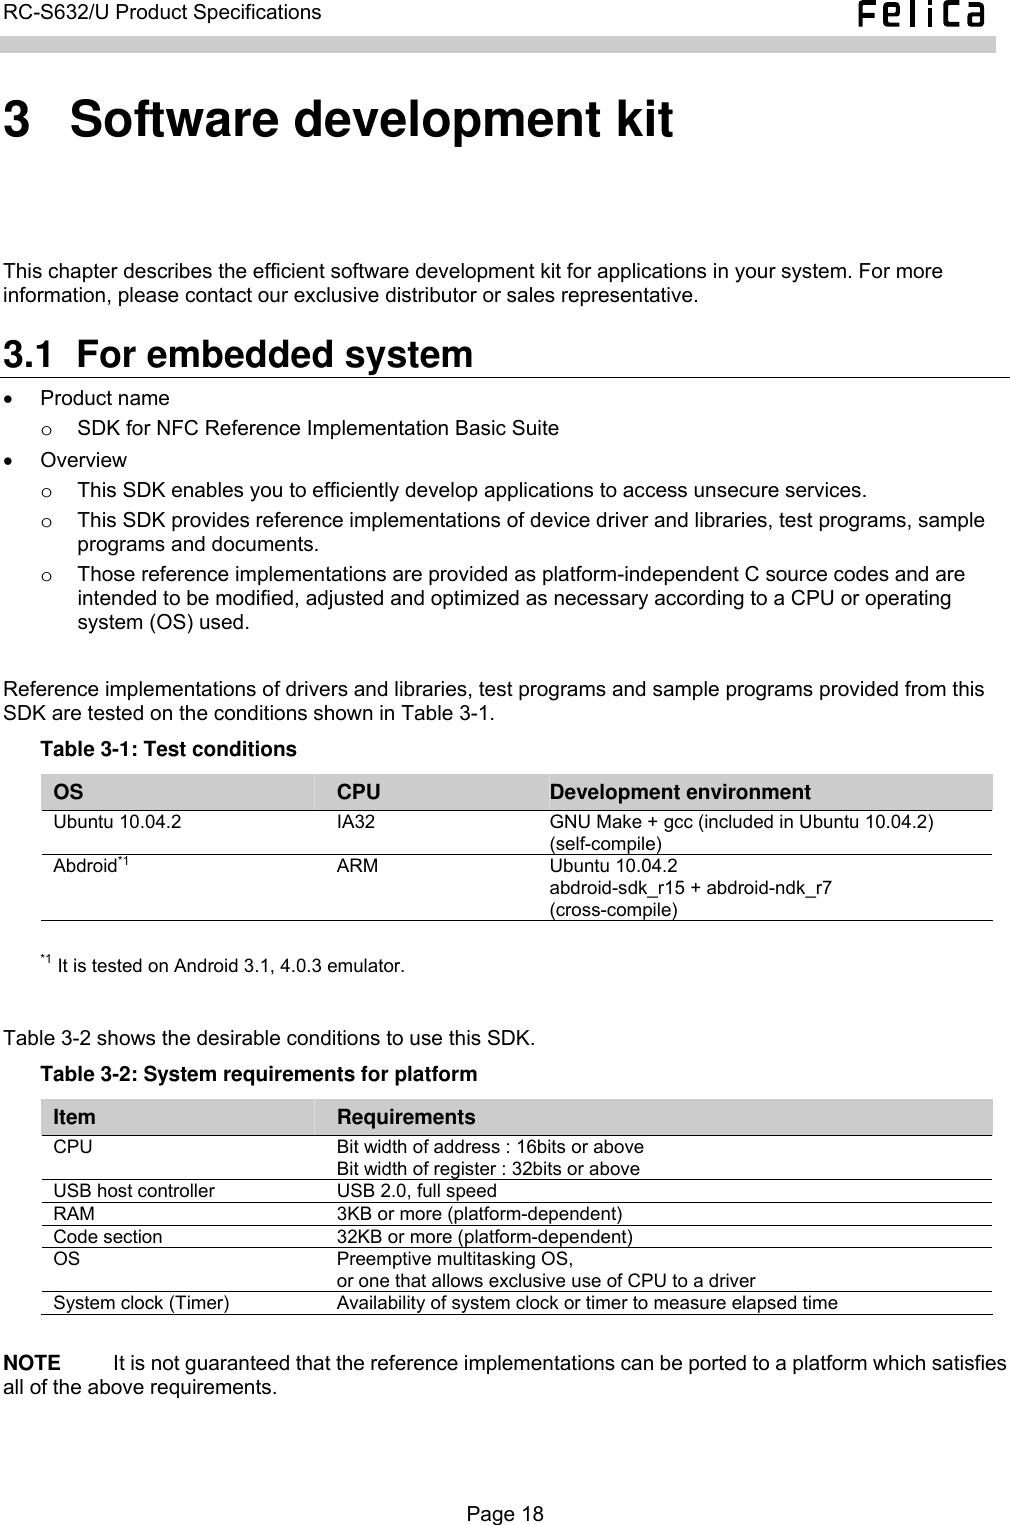   RC-S632/U Product Specifications  3  Software development kit This chapter describes the efficient software development kit for applications in your system. For more information, please contact our exclusive distributor or sales representative. 3.1  For embedded system • Product name o  SDK for NFC Reference Implementation Basic Suite • Overview  o  This SDK enables you to efficiently develop applications to access unsecure services. o  This SDK provides reference implementations of device driver and libraries, test programs, sample programs and documents. o  Those reference implementations are provided as platform-independent C source codes and are intended to be modified, adjusted and optimized as necessary according to a CPU or operating system (OS) used.  Reference implementations of drivers and libraries, test programs and sample programs provided from this SDK are tested on the conditions shown in Table 3-1. Table 3-1: Test conditions OS  CPU  Development environment Ubuntu 10.04.2  IA32  GNU Make + gcc (included in Ubuntu 10.04.2) (self-compile) Abdroid*1 ARM Ubuntu 10.04.2 abdroid-sdk_r15 + abdroid-ndk_r7 (cross-compile)  *1 It is tested on Android 3.1, 4.0.3 emulator.  Table 3-2 shows the desirable conditions to use this SDK. Table 3-2: System requirements for platform Item  Requirements CPU    Bit width of address : 16bits or above Bit width of register : 32bits or above USB host controller  USB 2.0, full speed RAM  3KB or more (platform-dependent) Code section  32KB or more (platform-dependent) OS  Preemptive multitasking OS, or one that allows exclusive use of CPU to a driver System clock (Timer)  Availability of system clock or timer to measure elapsed time  NOTE     It is not guaranteed that the reference implementations can be ported to a platform which satisfies all of the above requirements.  Page 18  